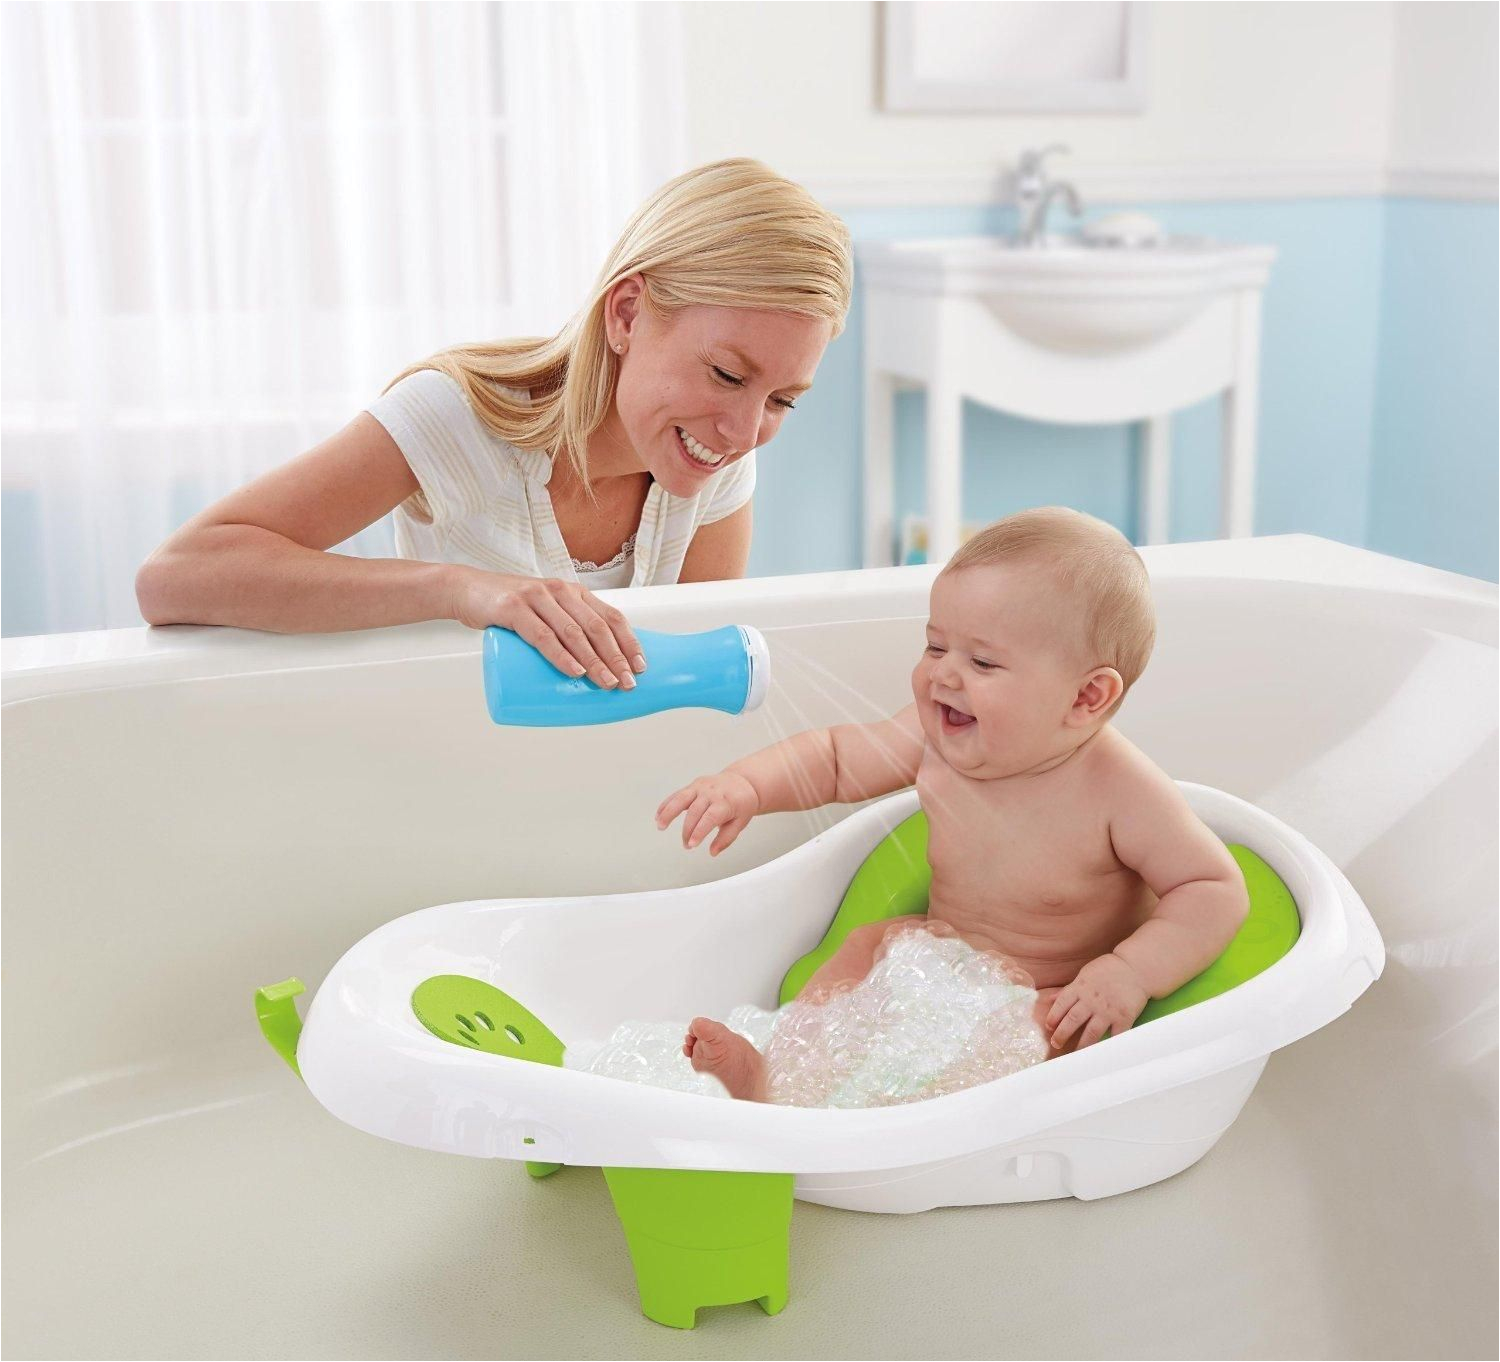 Baby Bath Seat for Tub Amazon Fisher Price 4 In 1 Sling N Seat Tub Baby